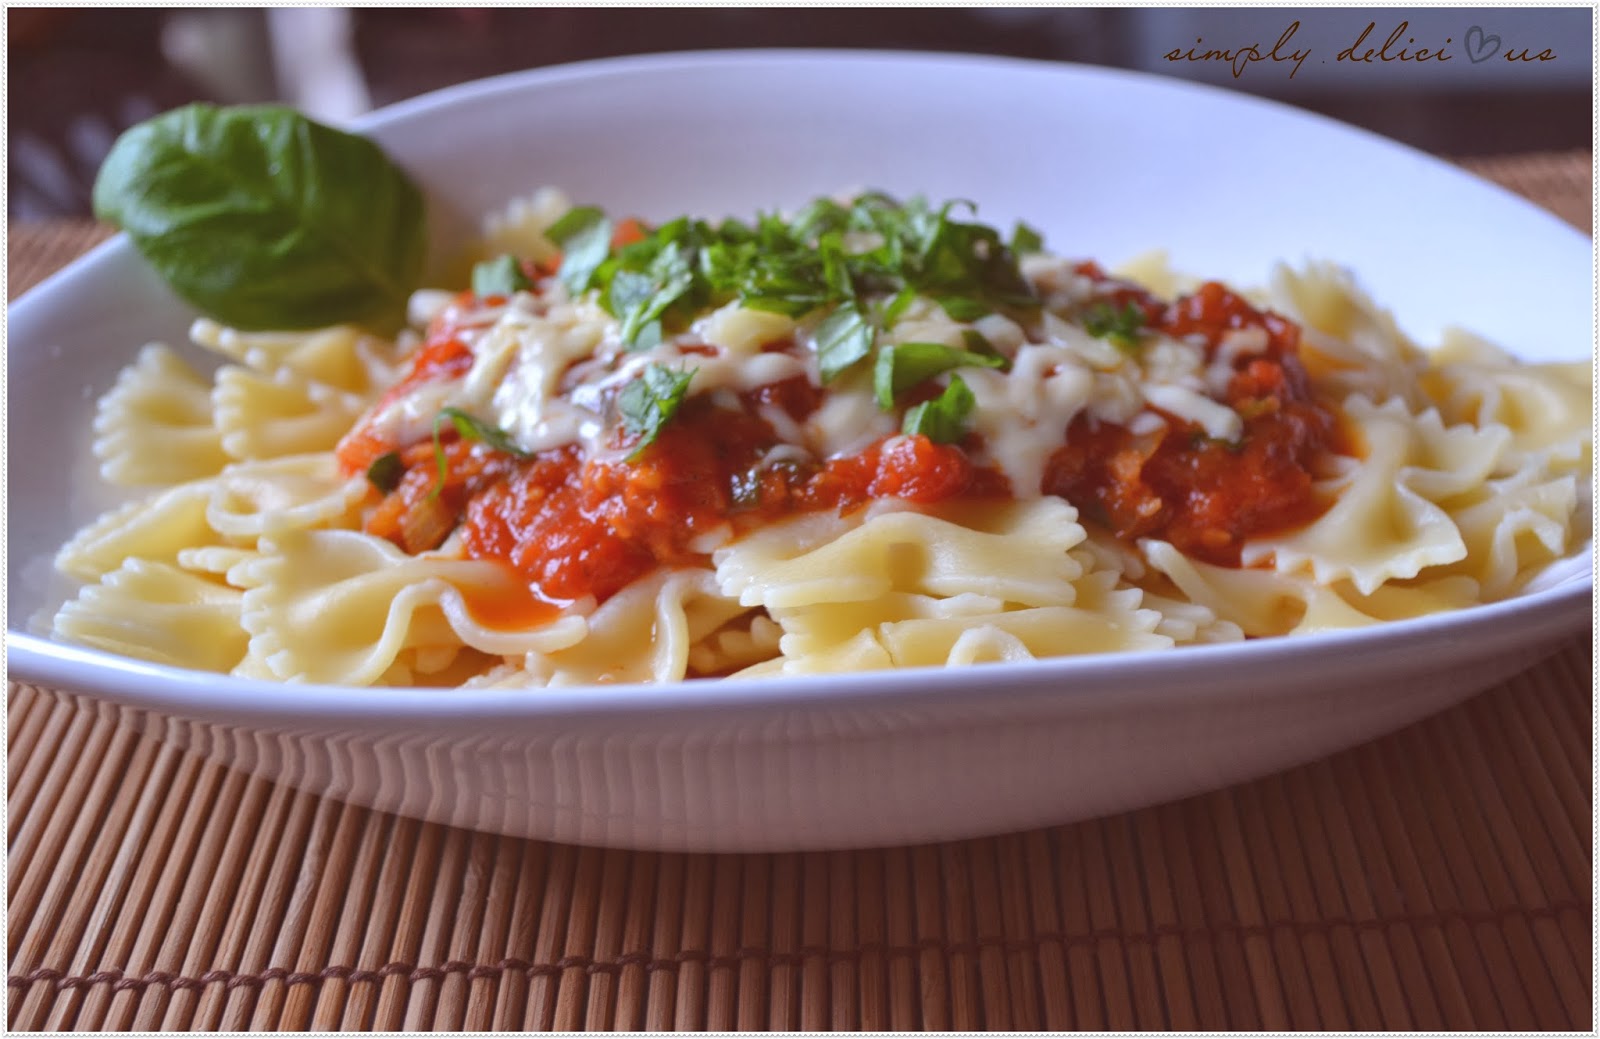 Simply delicious: Farfalle mit Tomaten-Basilikum-Soße &amp;quot;own creation&amp;quot;